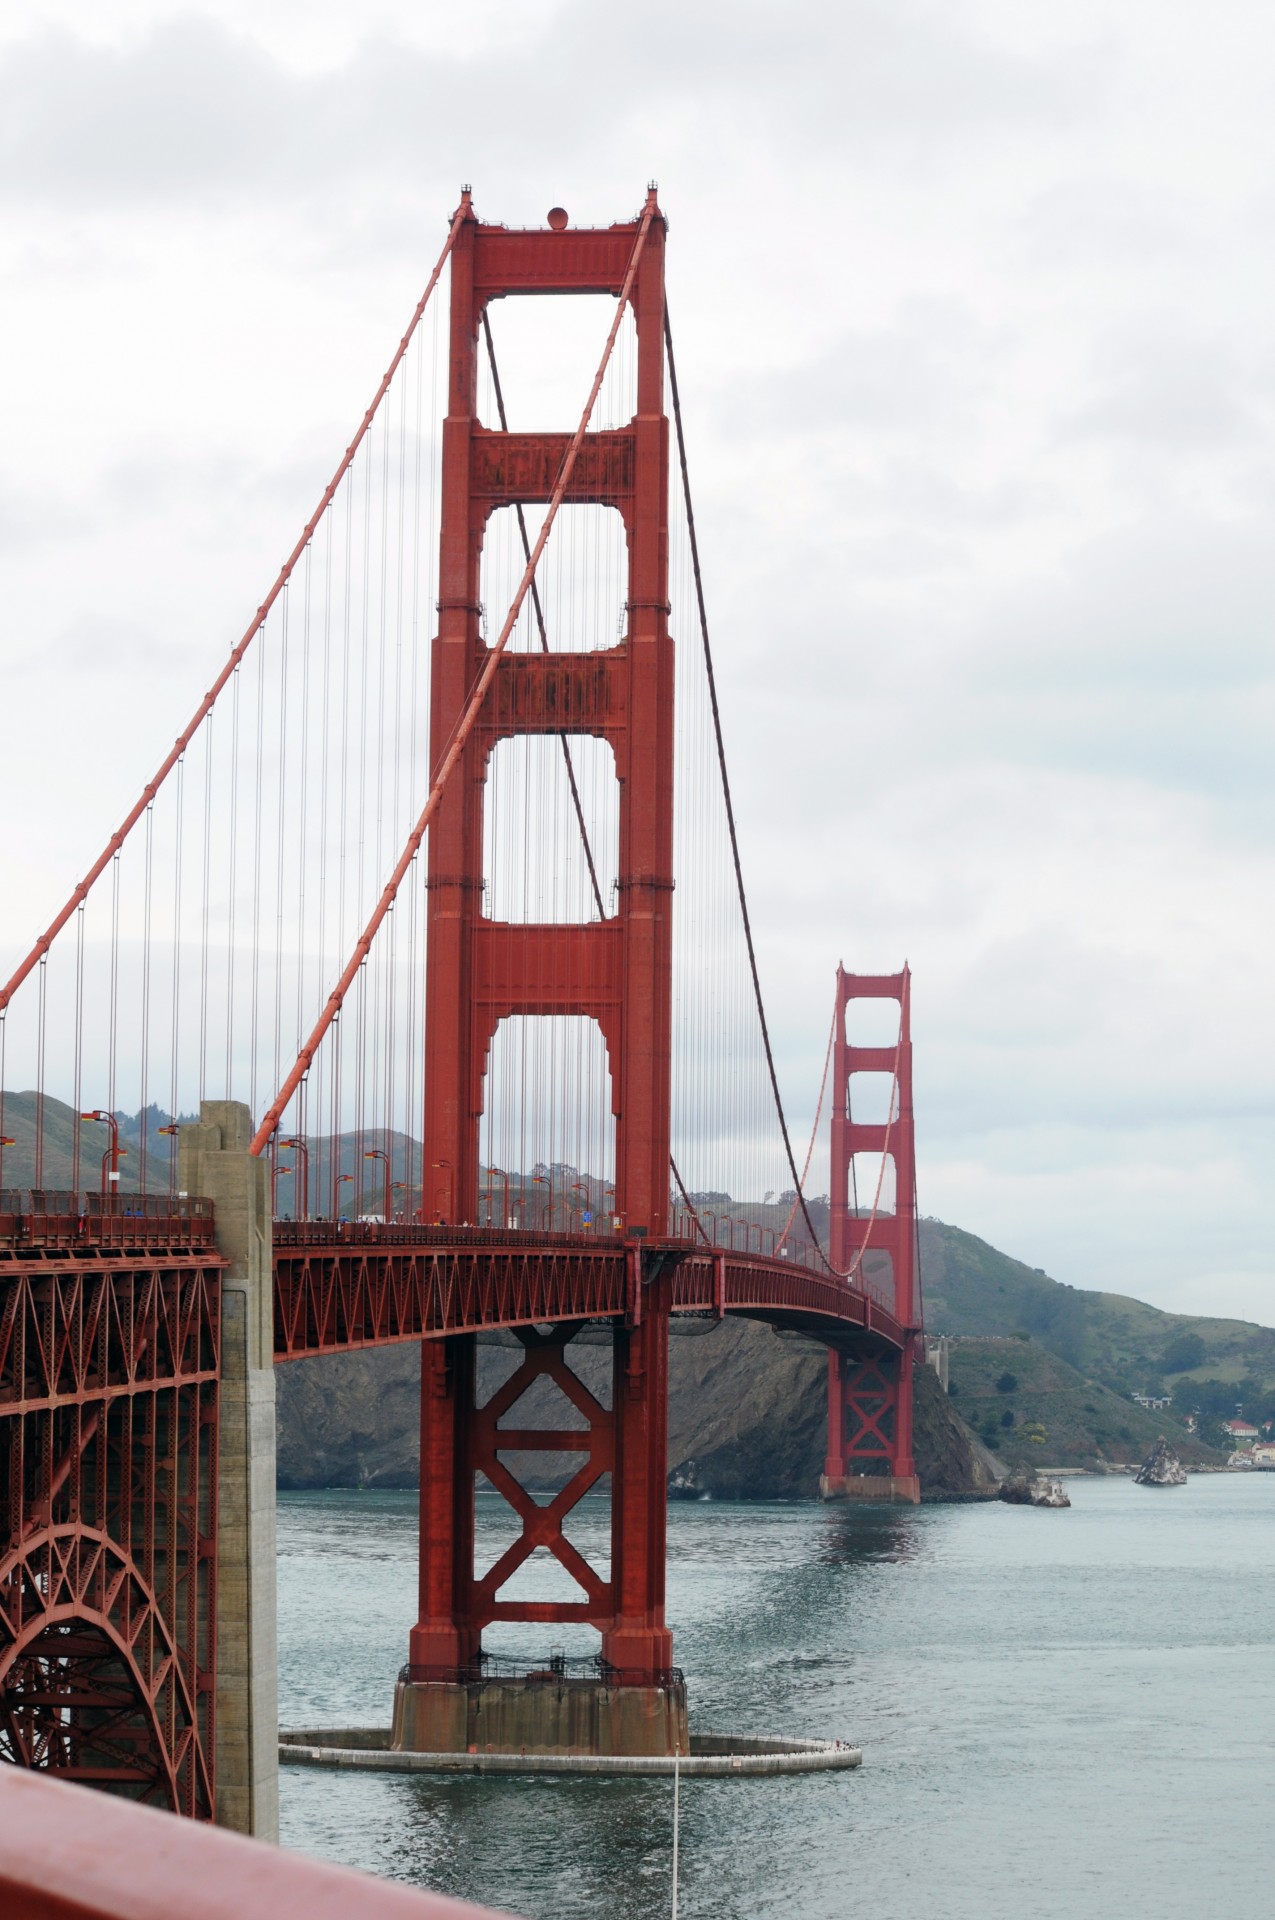 The magnificent feat of engineering - the red Golden Gate Bridge in San Francisco